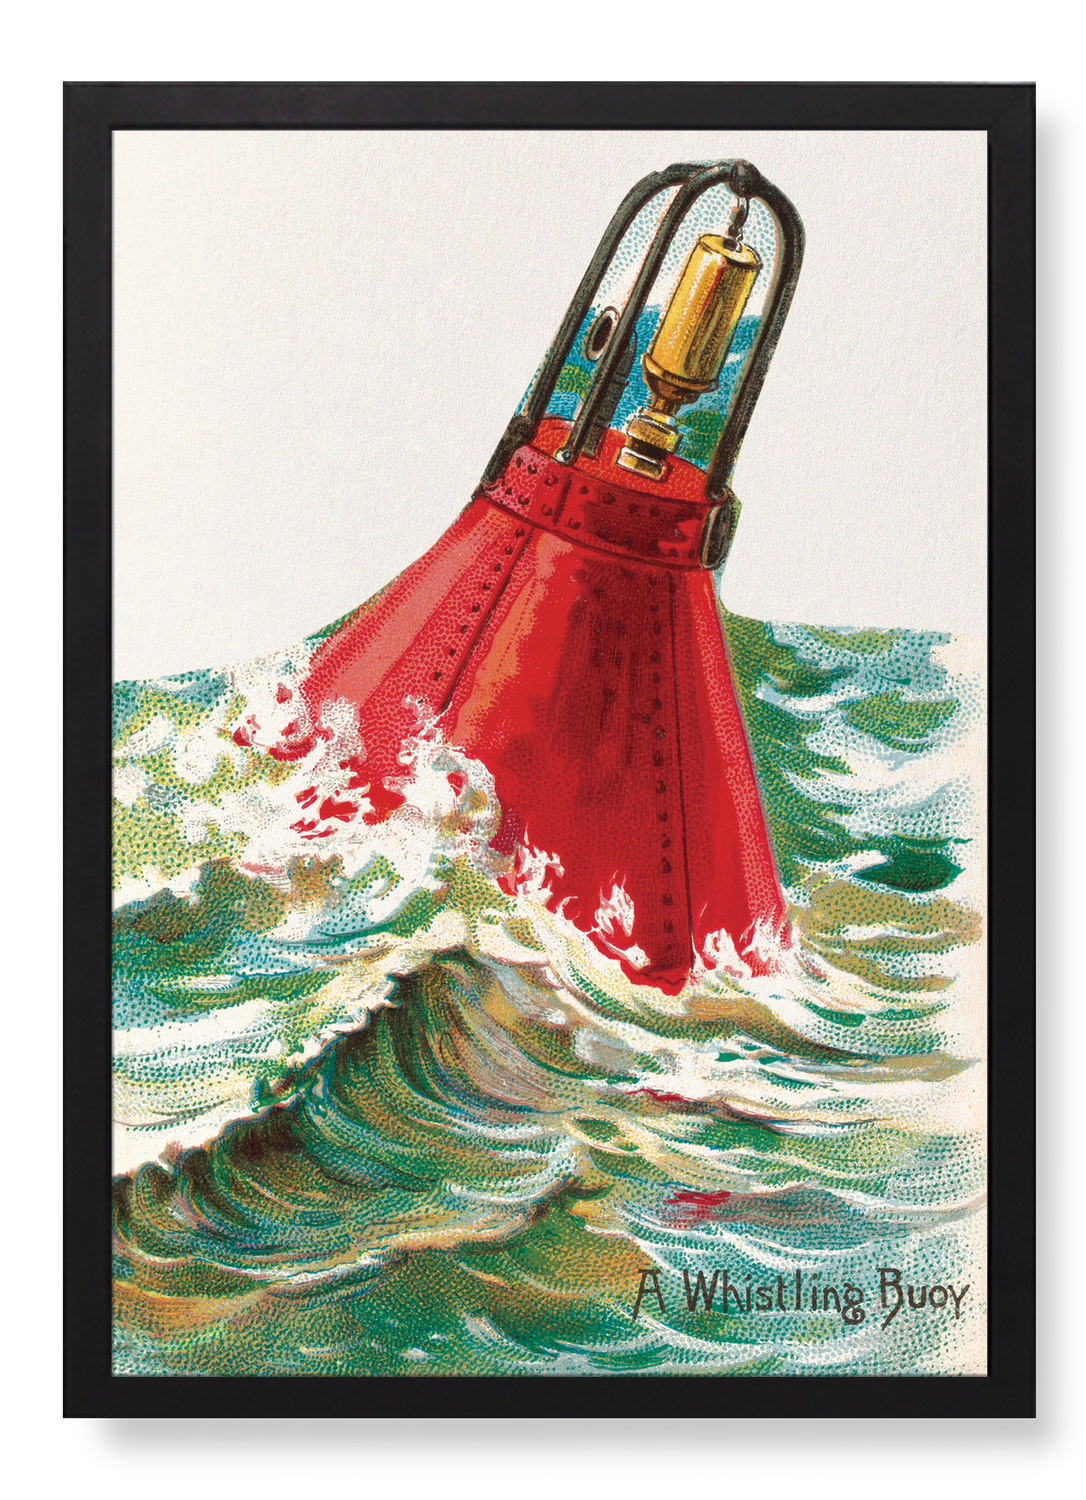 WHISTLING BUOY (1889)